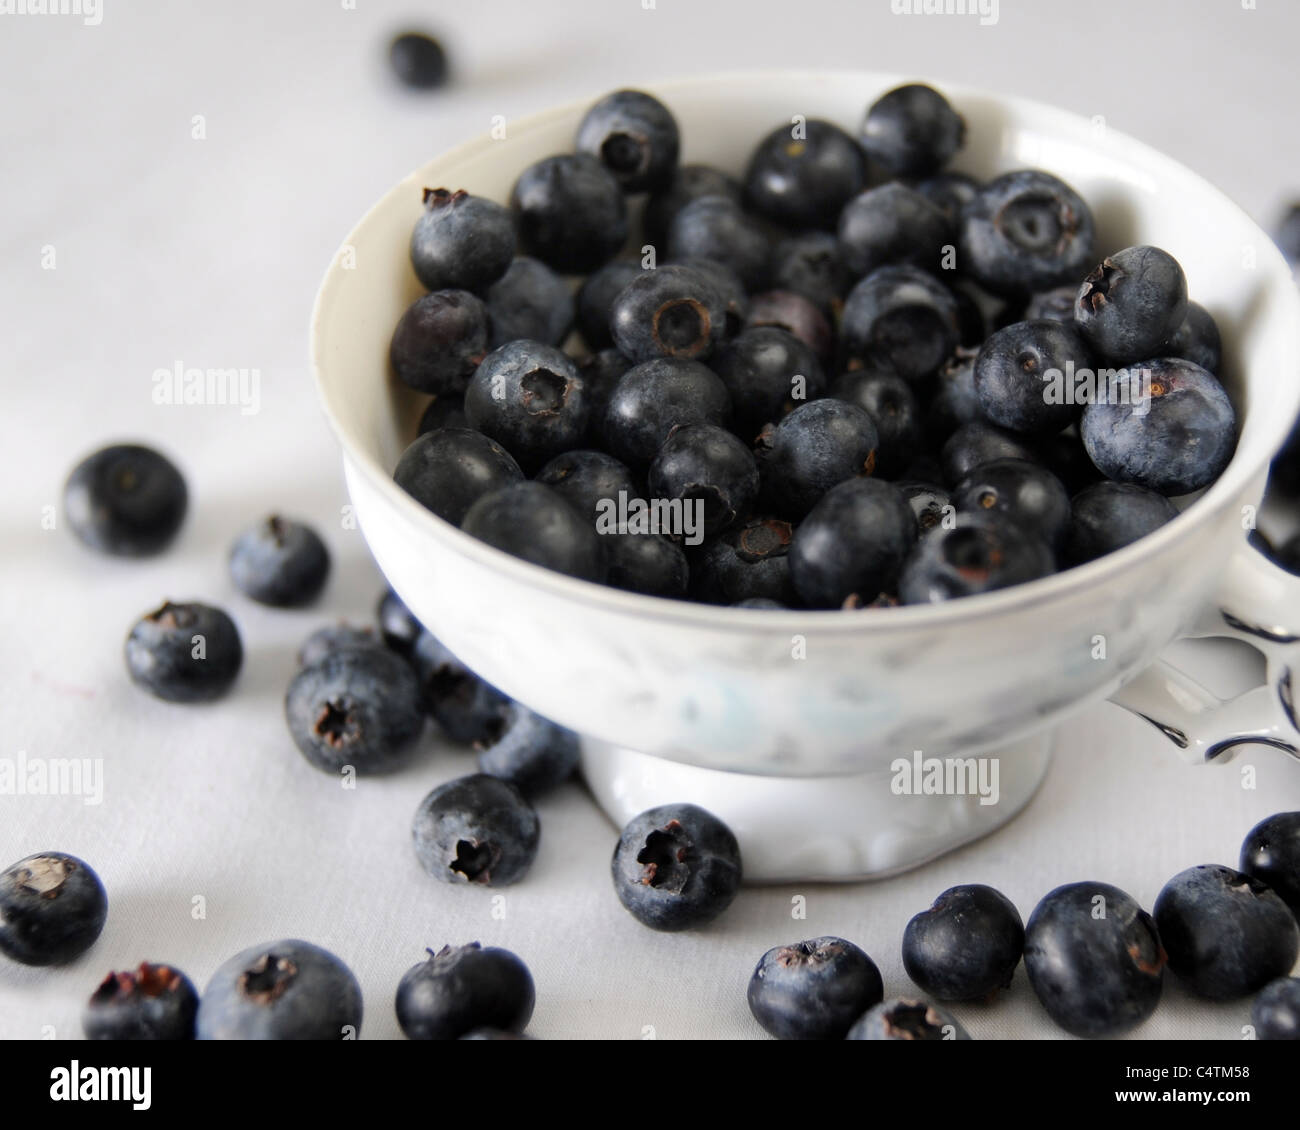 Here are Organic, sweet, low-calorie and versatile blueberries are high in antioxidants and are delicious with so many things. Stock Photo